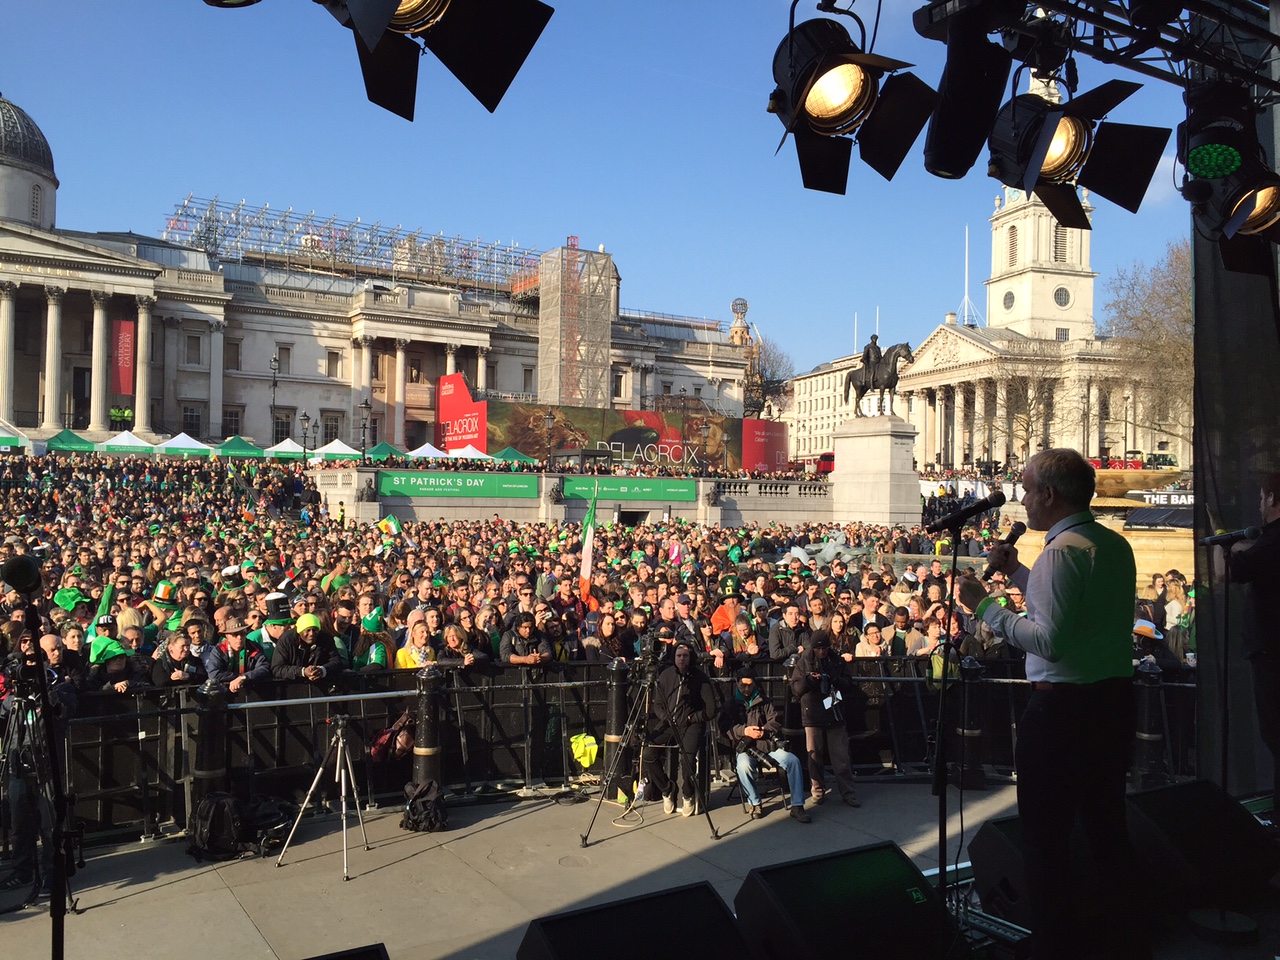 Colm O'Gorman, Executive Director of Amnesty International in Ireland, at St. Patricks Day Parade, London 13 March, 2016.